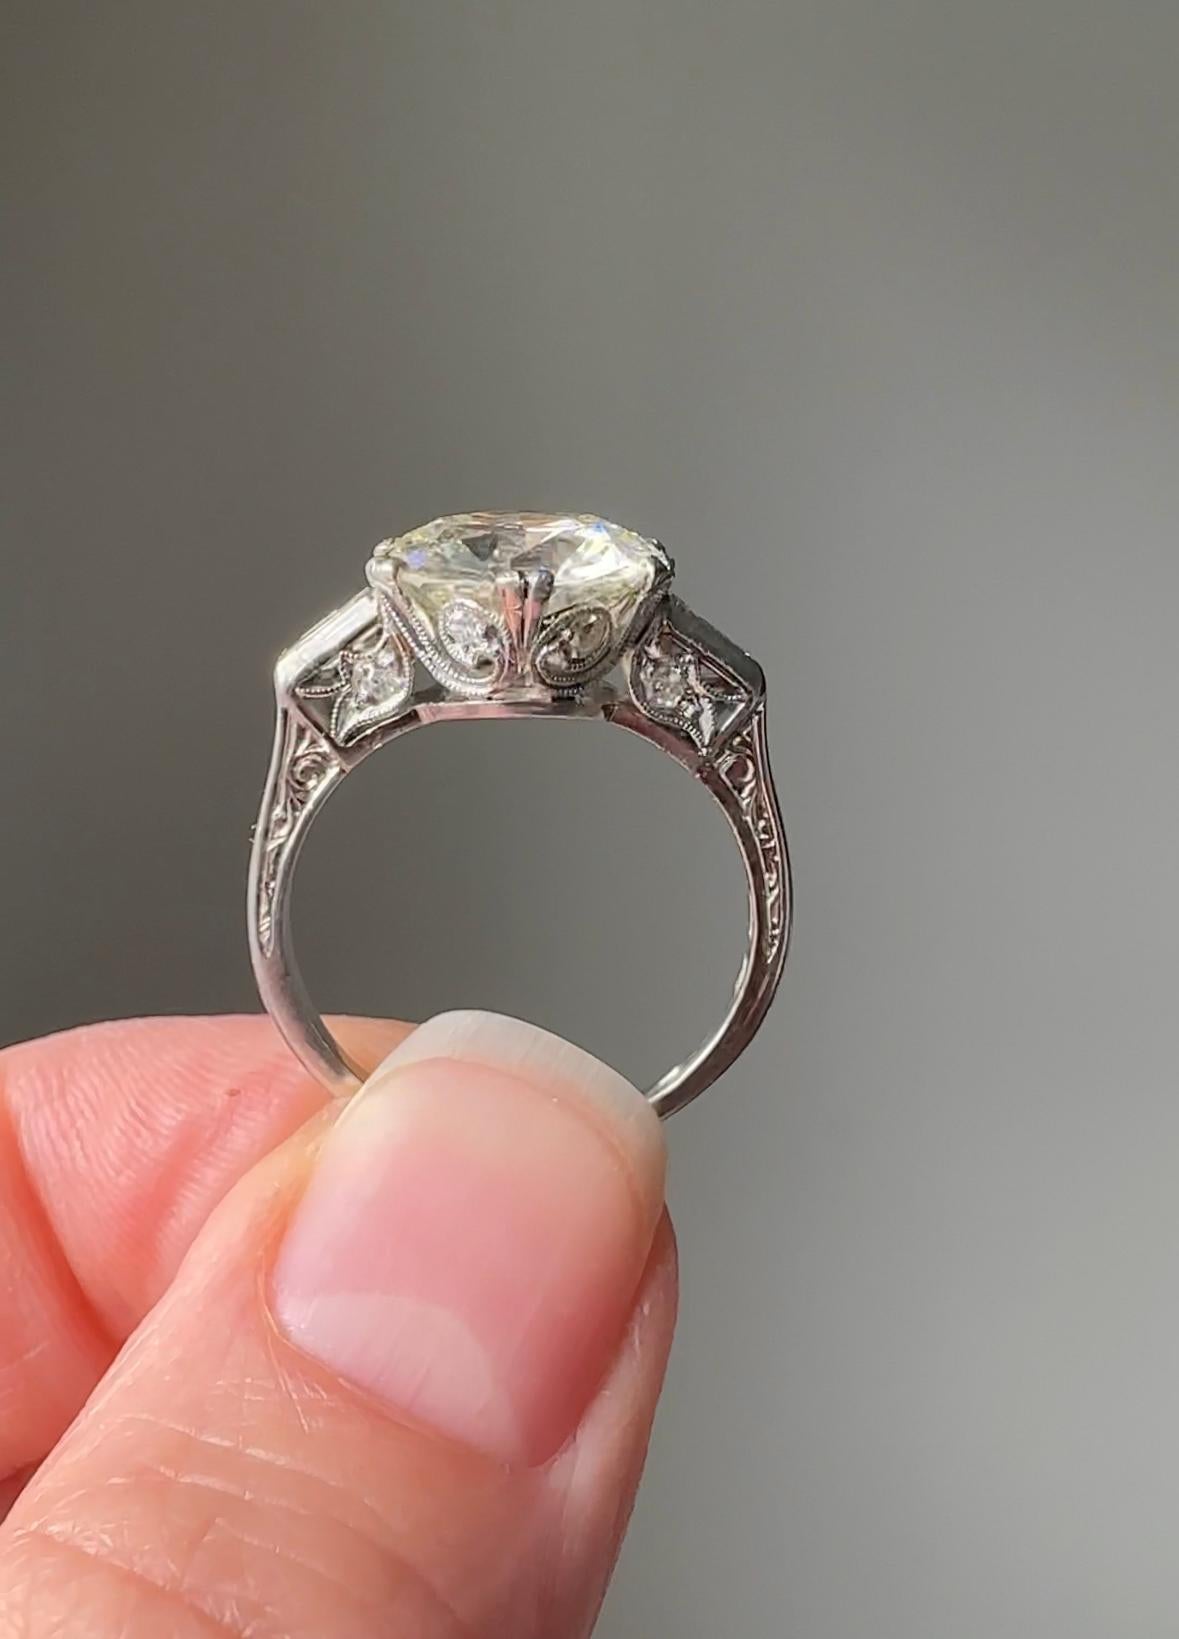 4.37 Carat European Cut Diamond Solitaire Ring, SI2 K In Excellent Condition For Sale In Hummelstown, PA